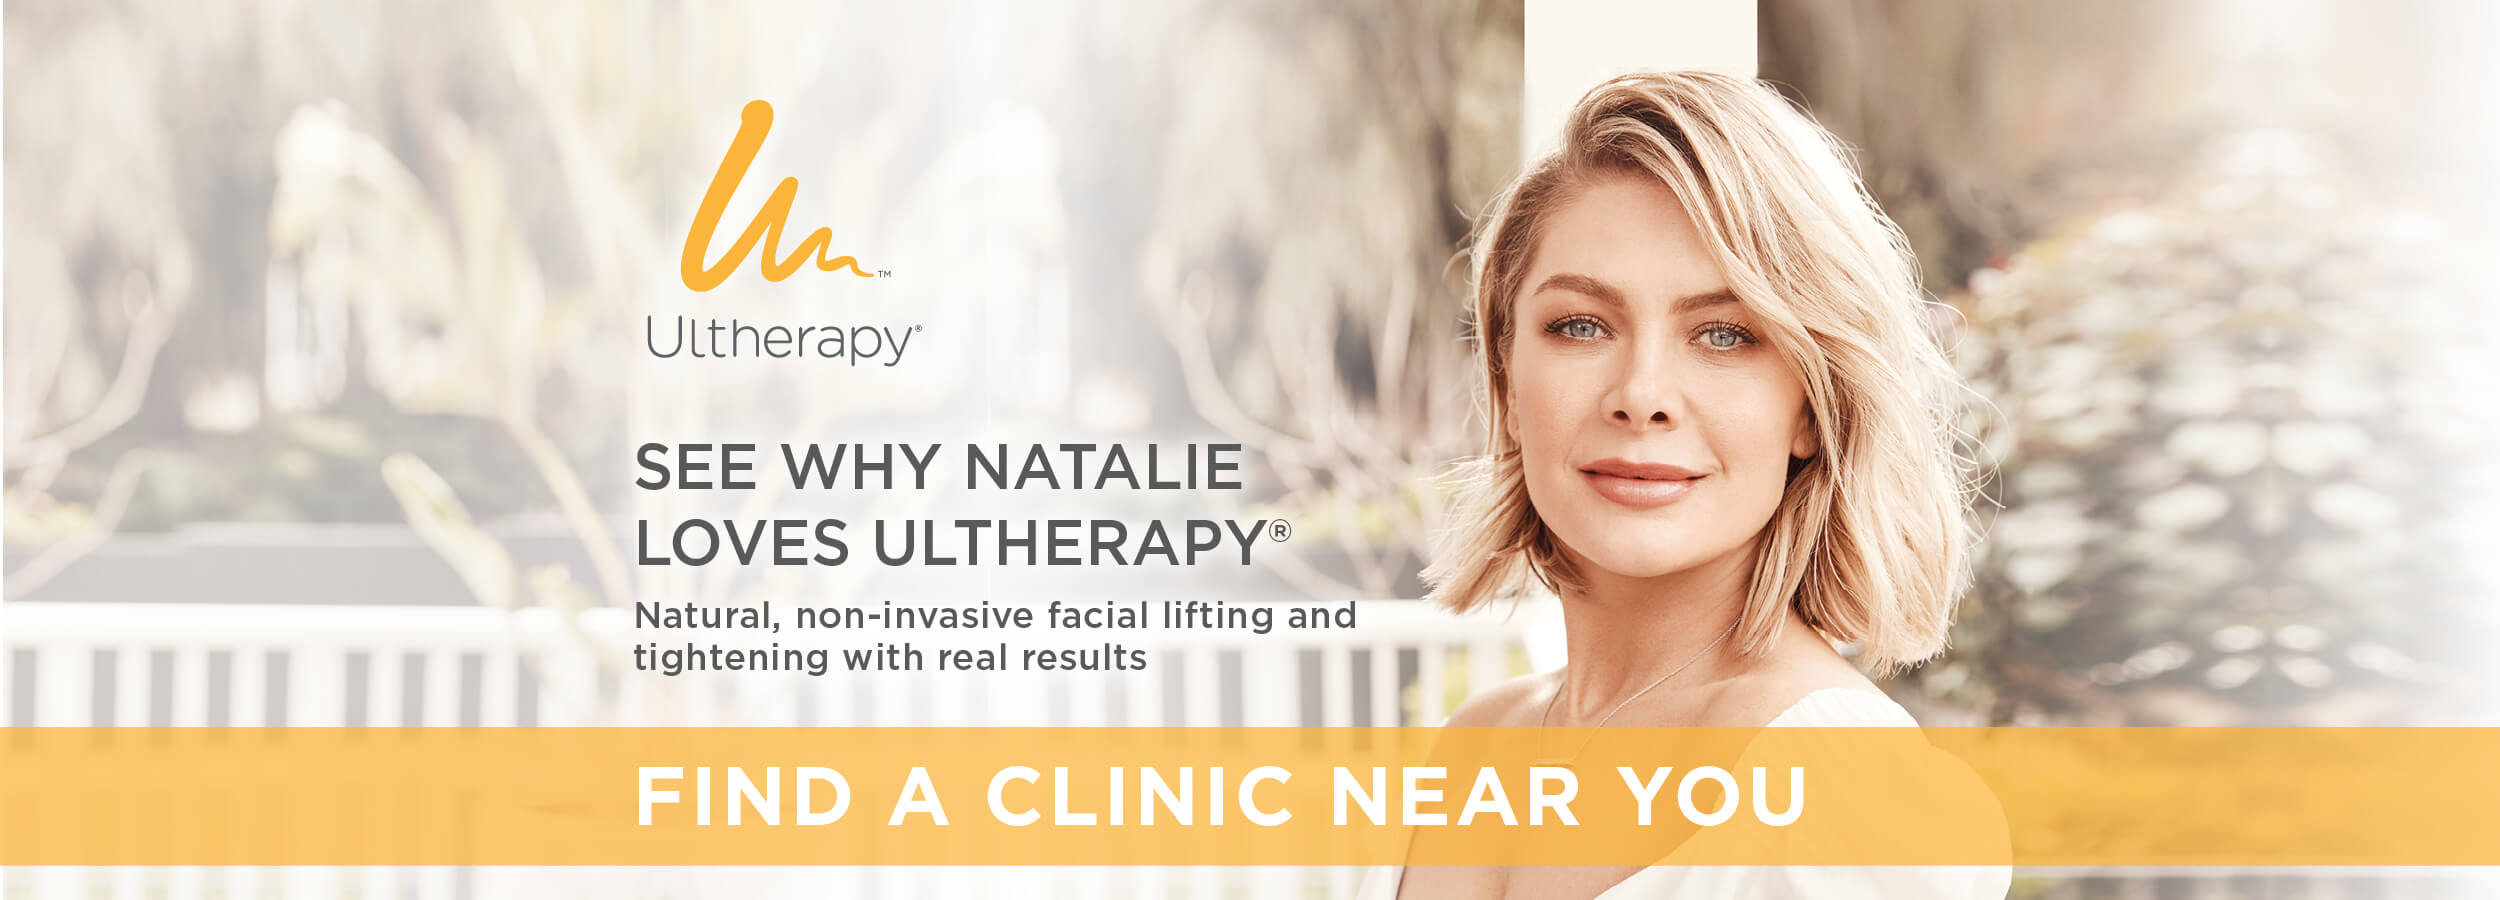 See Why Natalie Loves Ultherapy - Natural, non-invasive facial lifting and tightening with real results - Find a Clinic